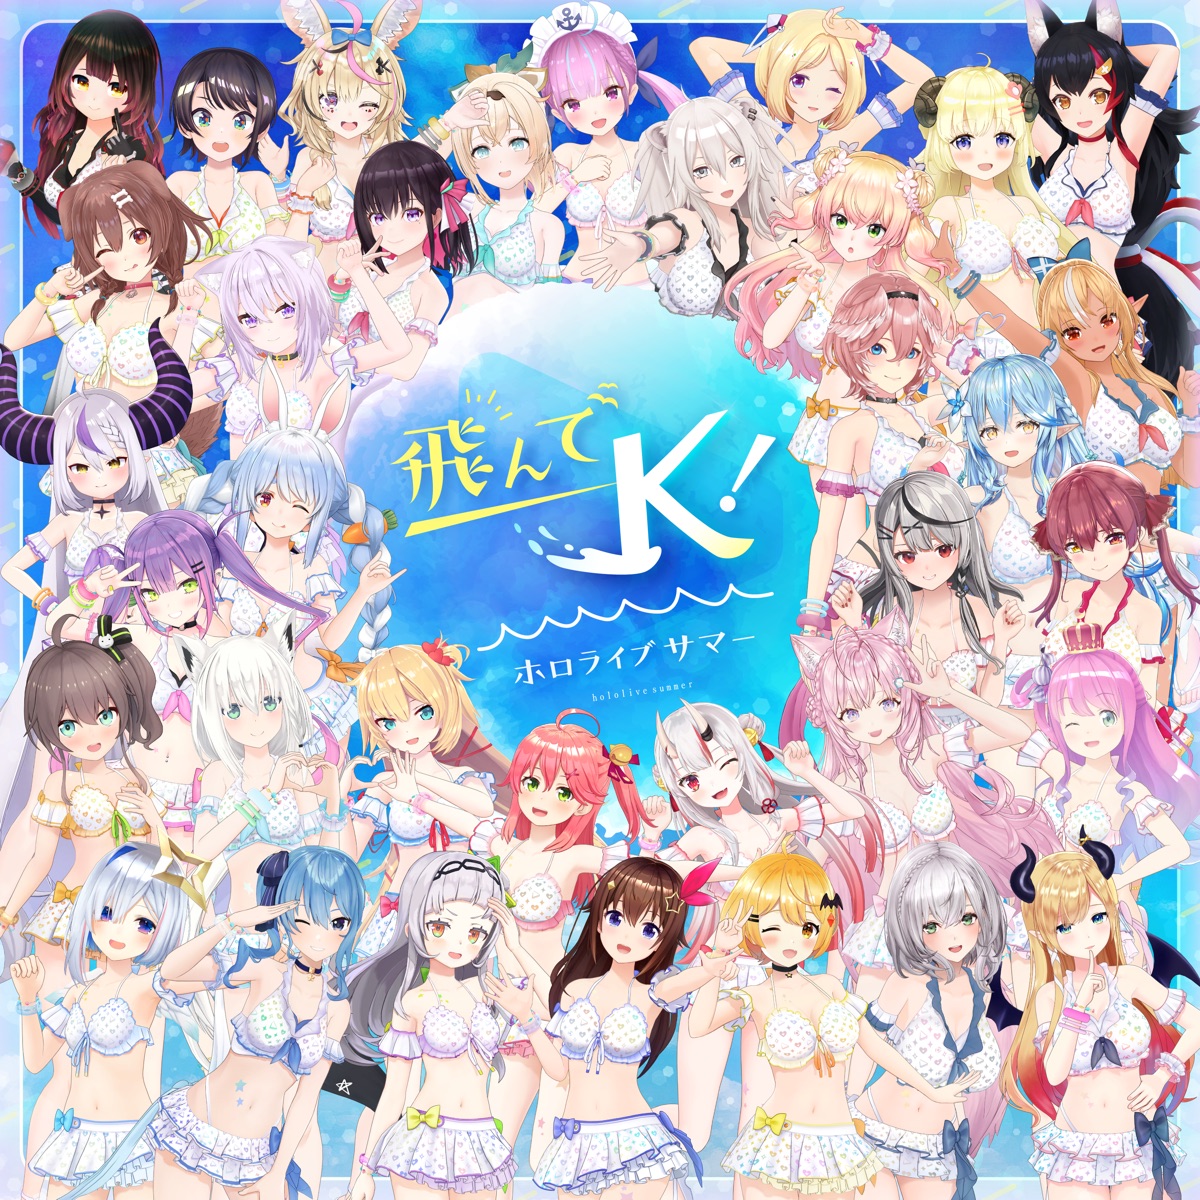 Cover art for『hololive IDOL PROJECT - 飛んでK！ホロライブサマー』from the release『Tonde K! hololive summer